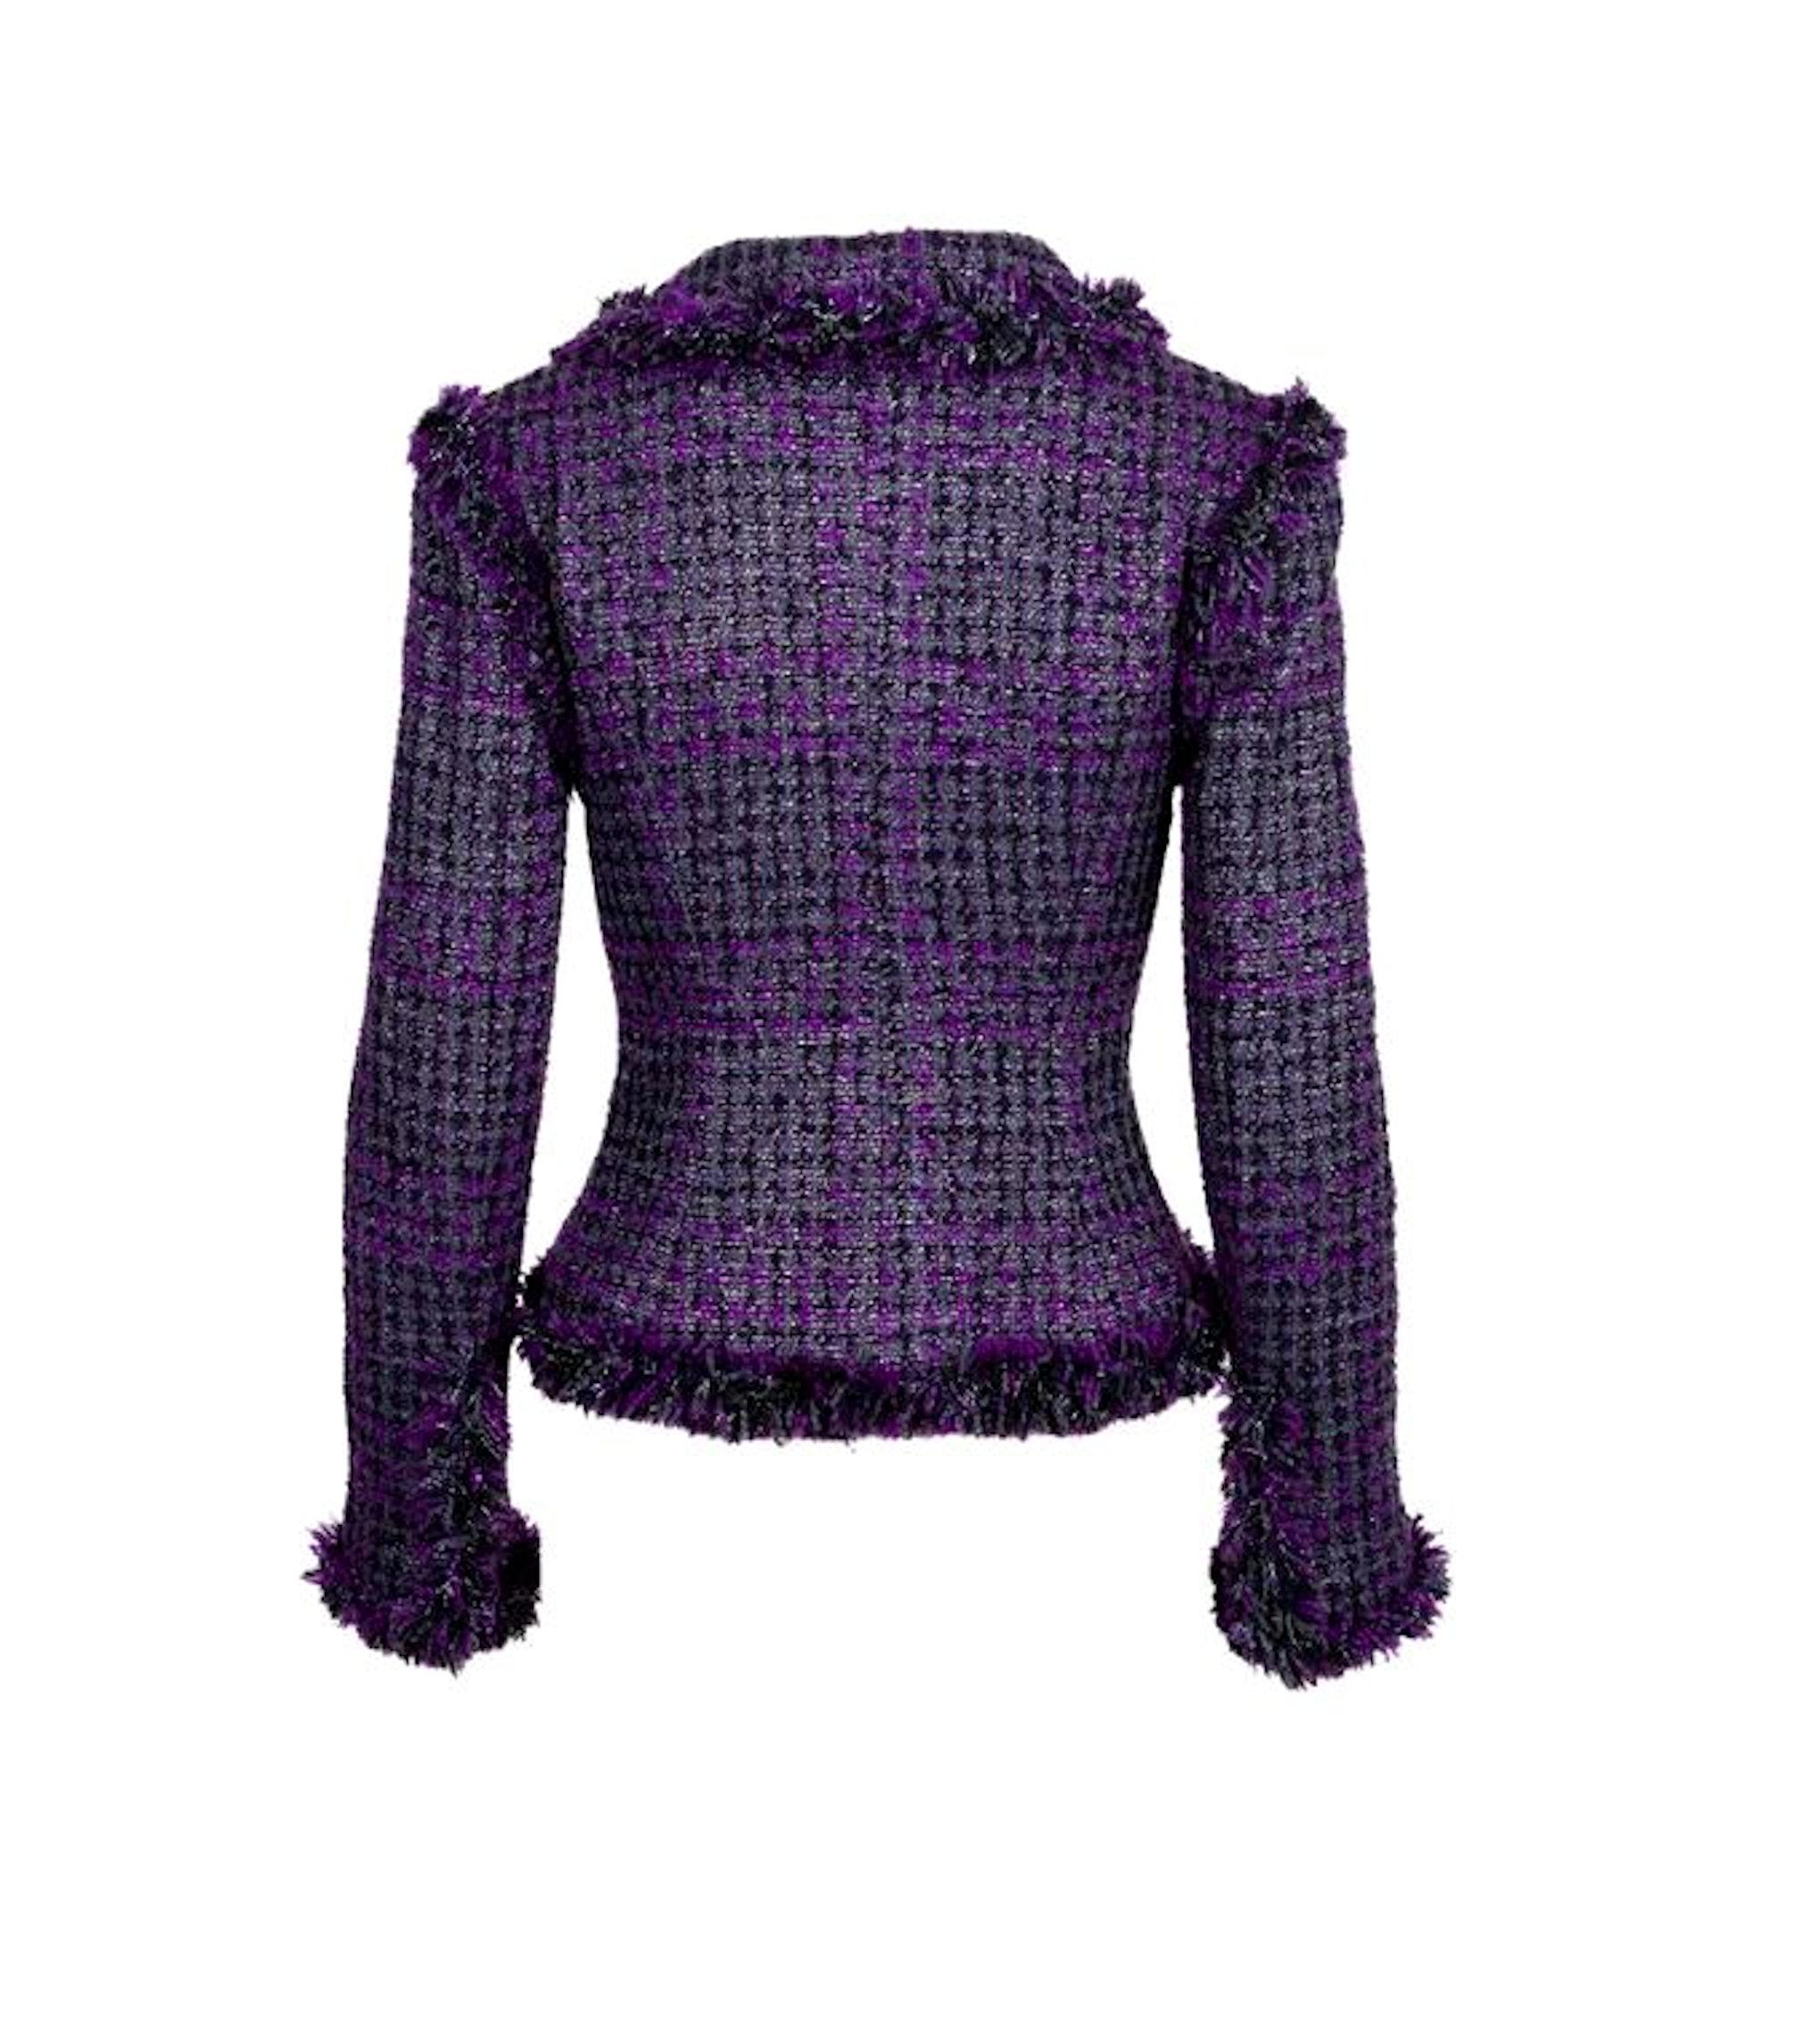 Beautiful CHANEL fantasy tweed jacket 
A true CHANEL signature item that will last you for many years
Wonderful colors - perfect with your favourite pair of jeans!
Closes in front 
Amazing tweed fabric with metallic contrast
Fringe details
Beautiful